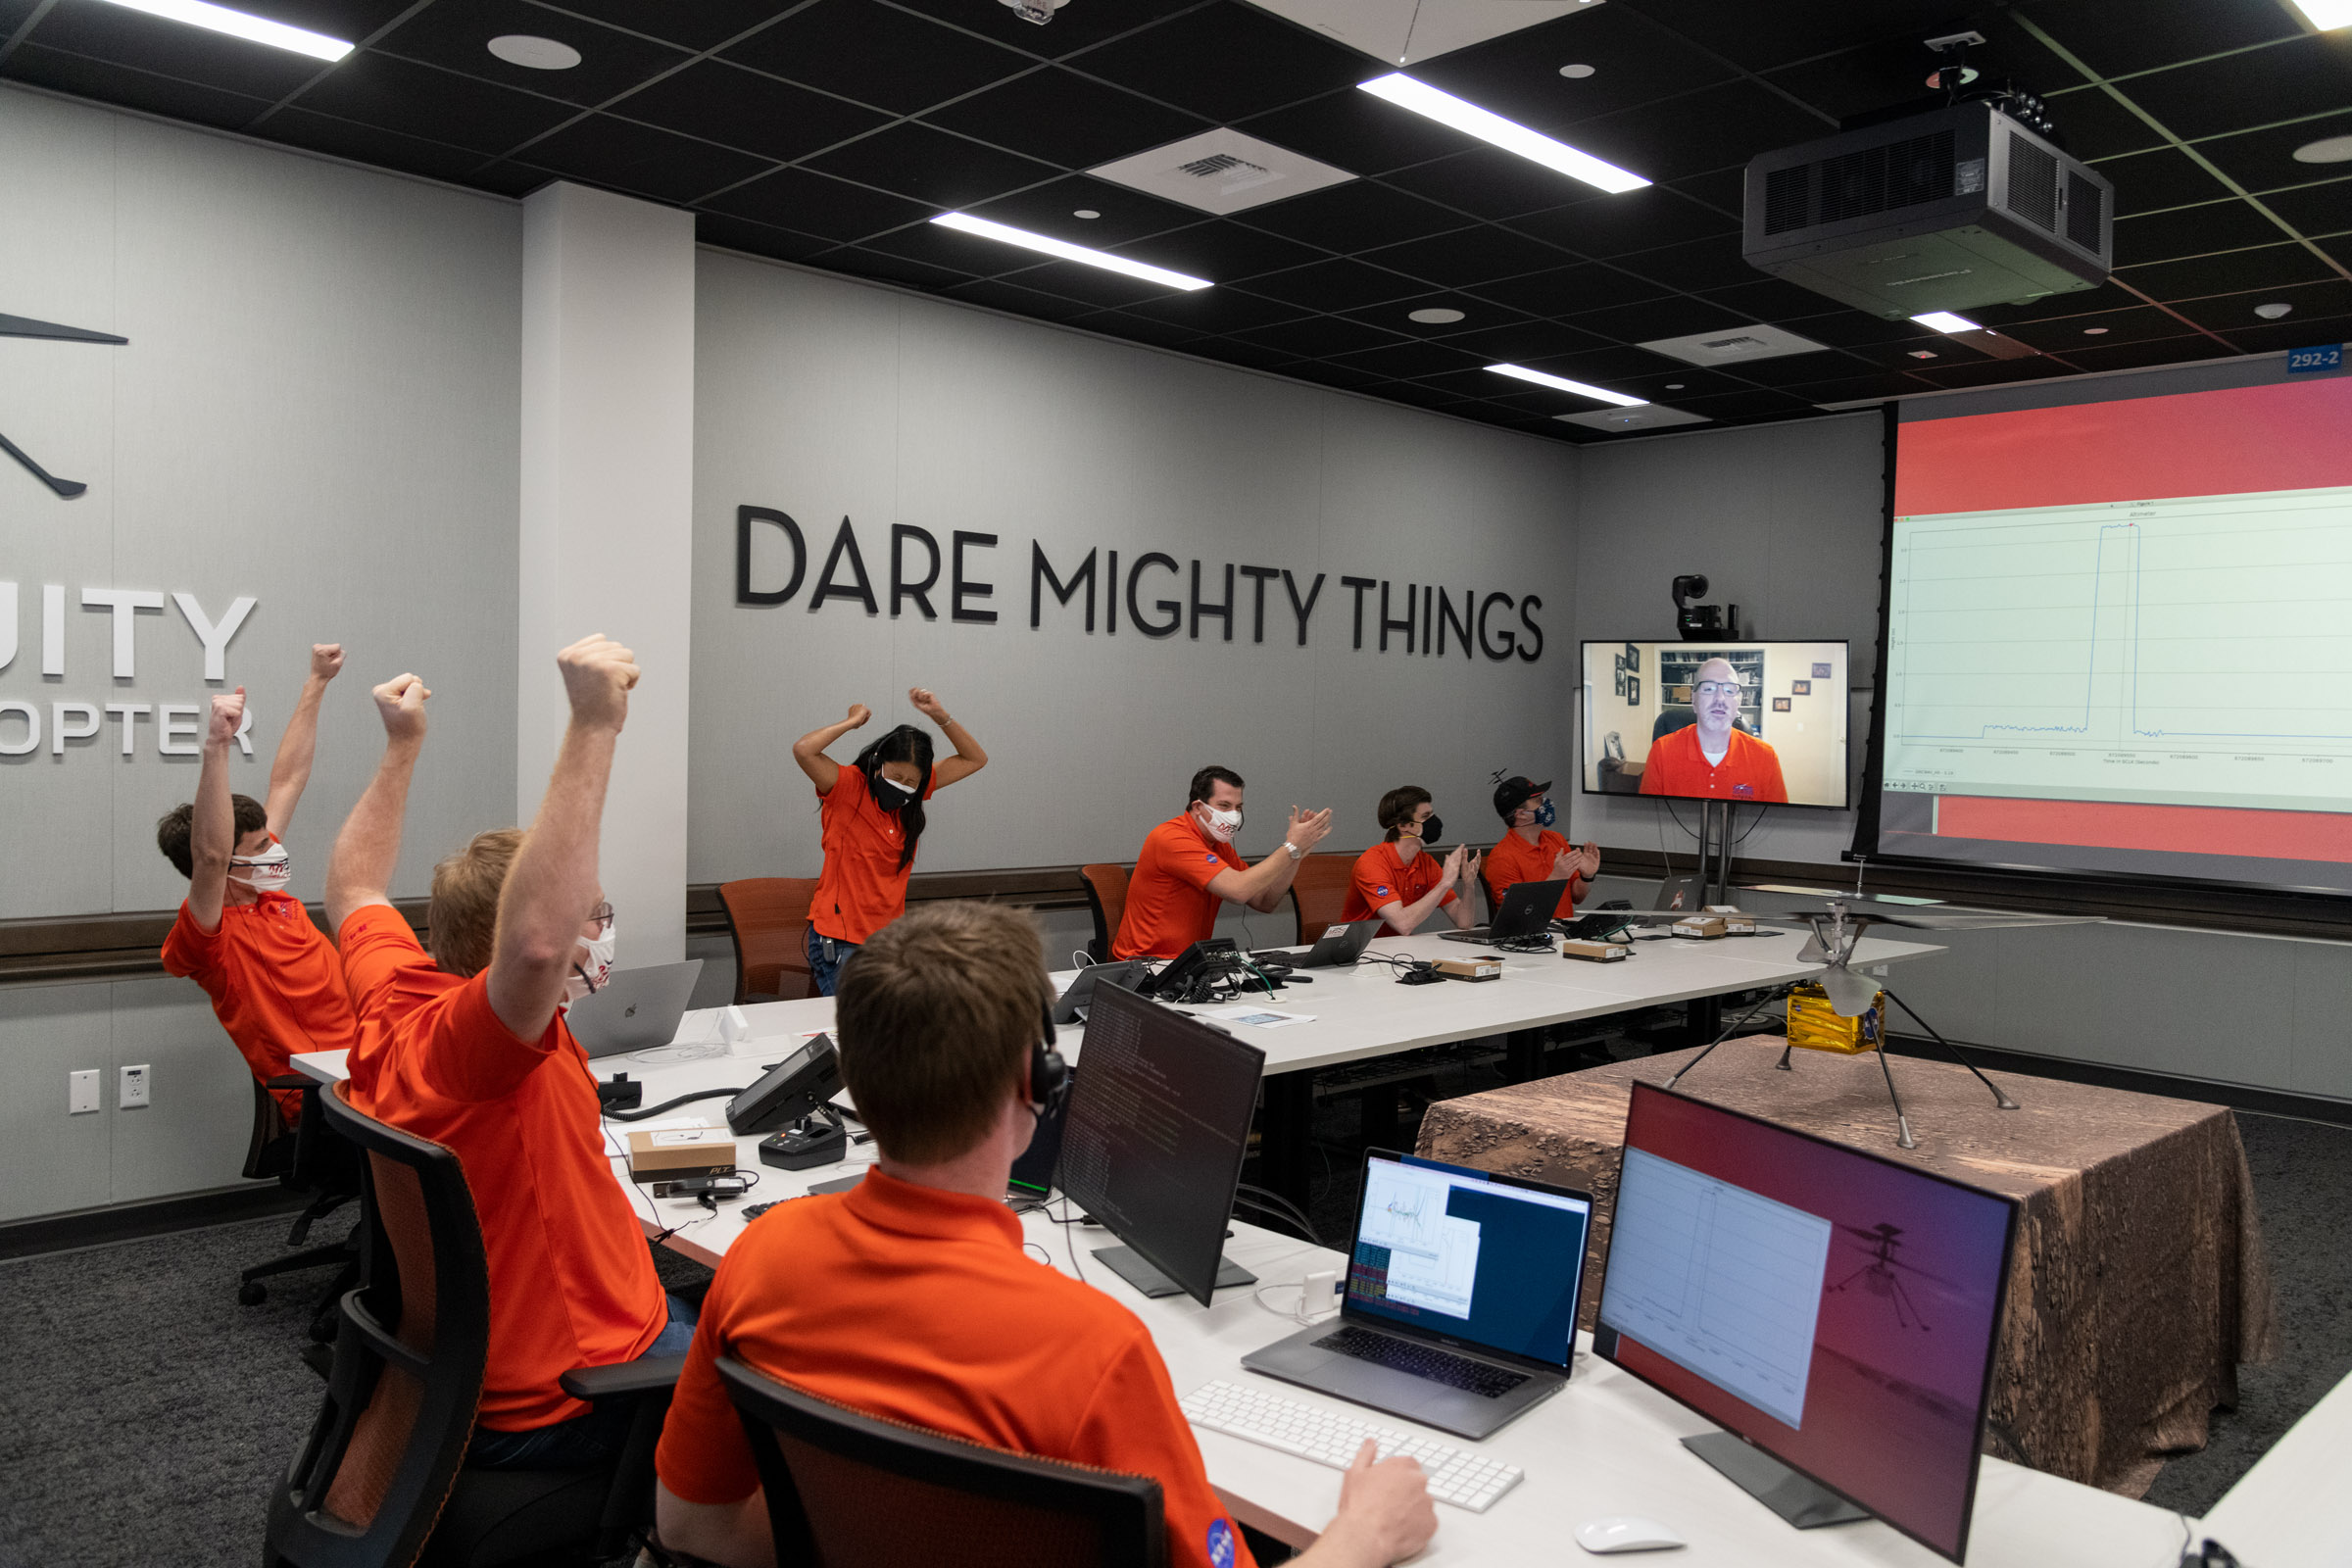 Members of NASA’s Ingenuity helicopter team in the Space Flight Operations Facility at NASA’s Jet Propulsion Laboratory react to data showing that the helicopter completed its first flight on April 19.